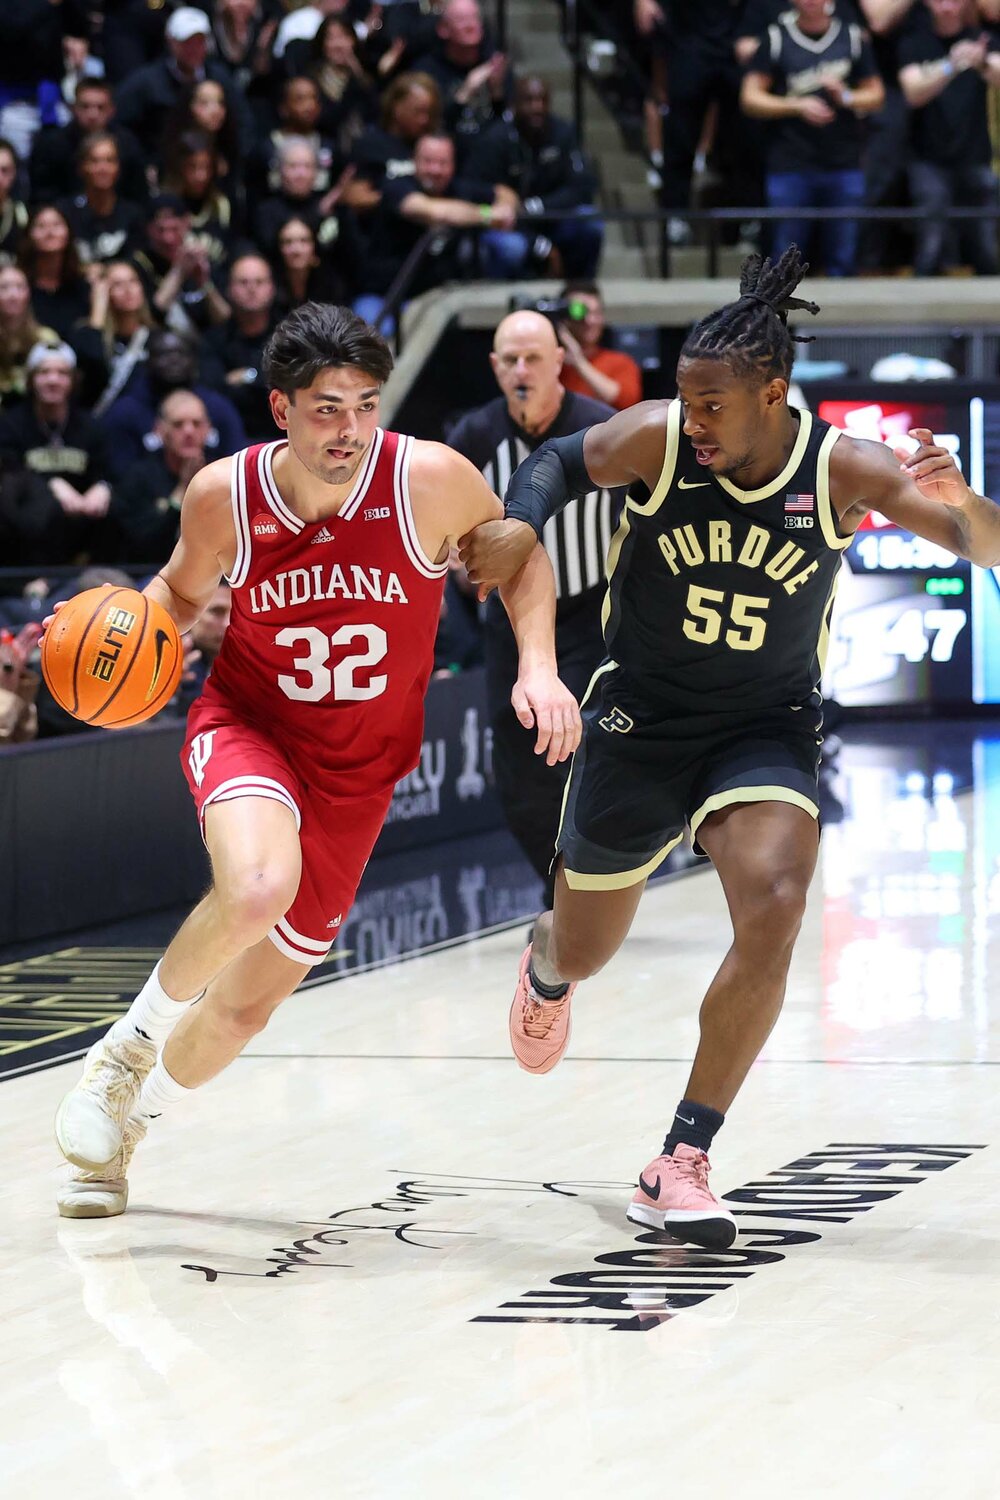 Trey Galloway of Indiana - driving on a fast break against Lance Jones of Purdue